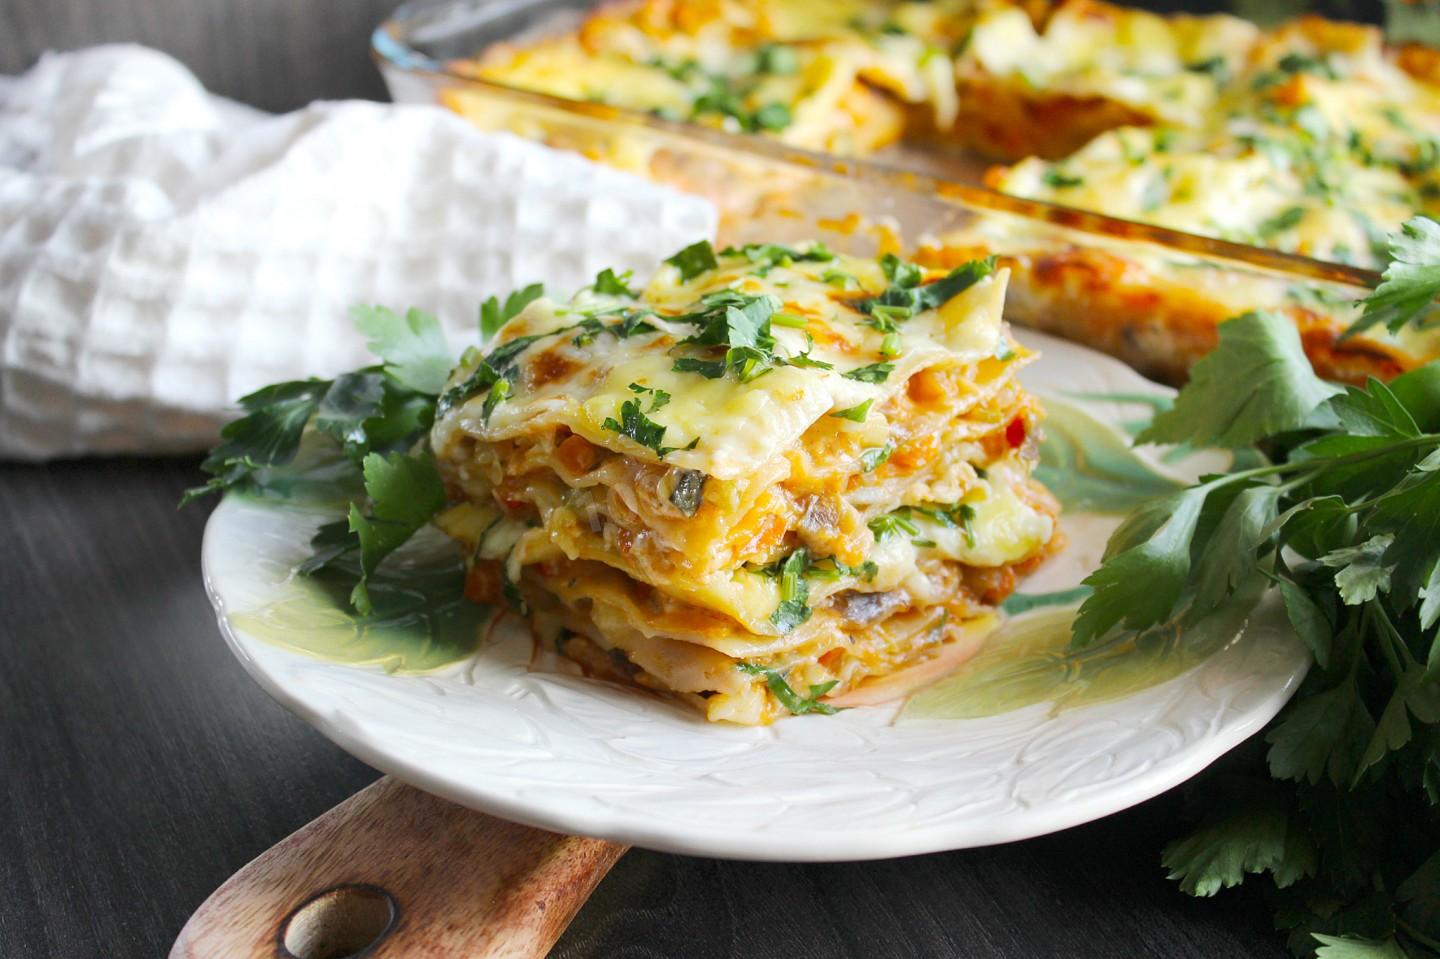 Lasagna with zucchini and herbs